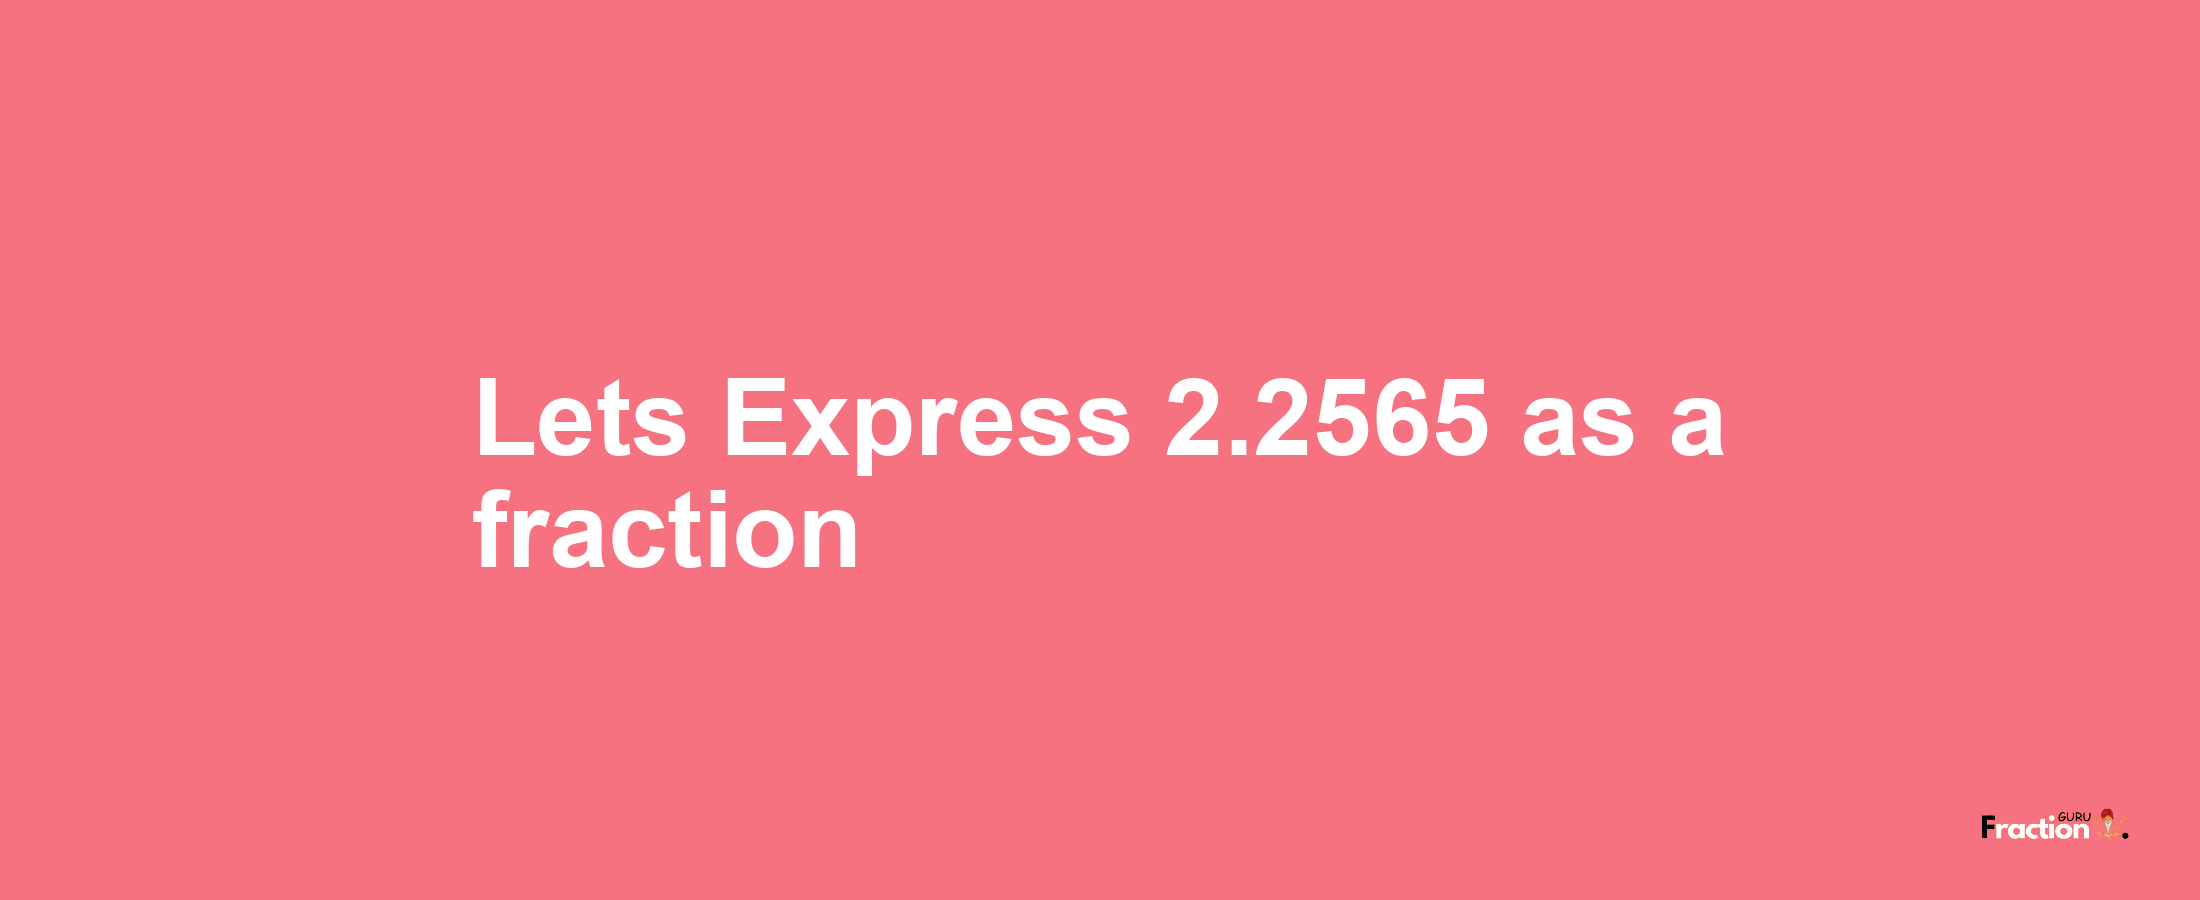 Lets Express 2.2565 as afraction